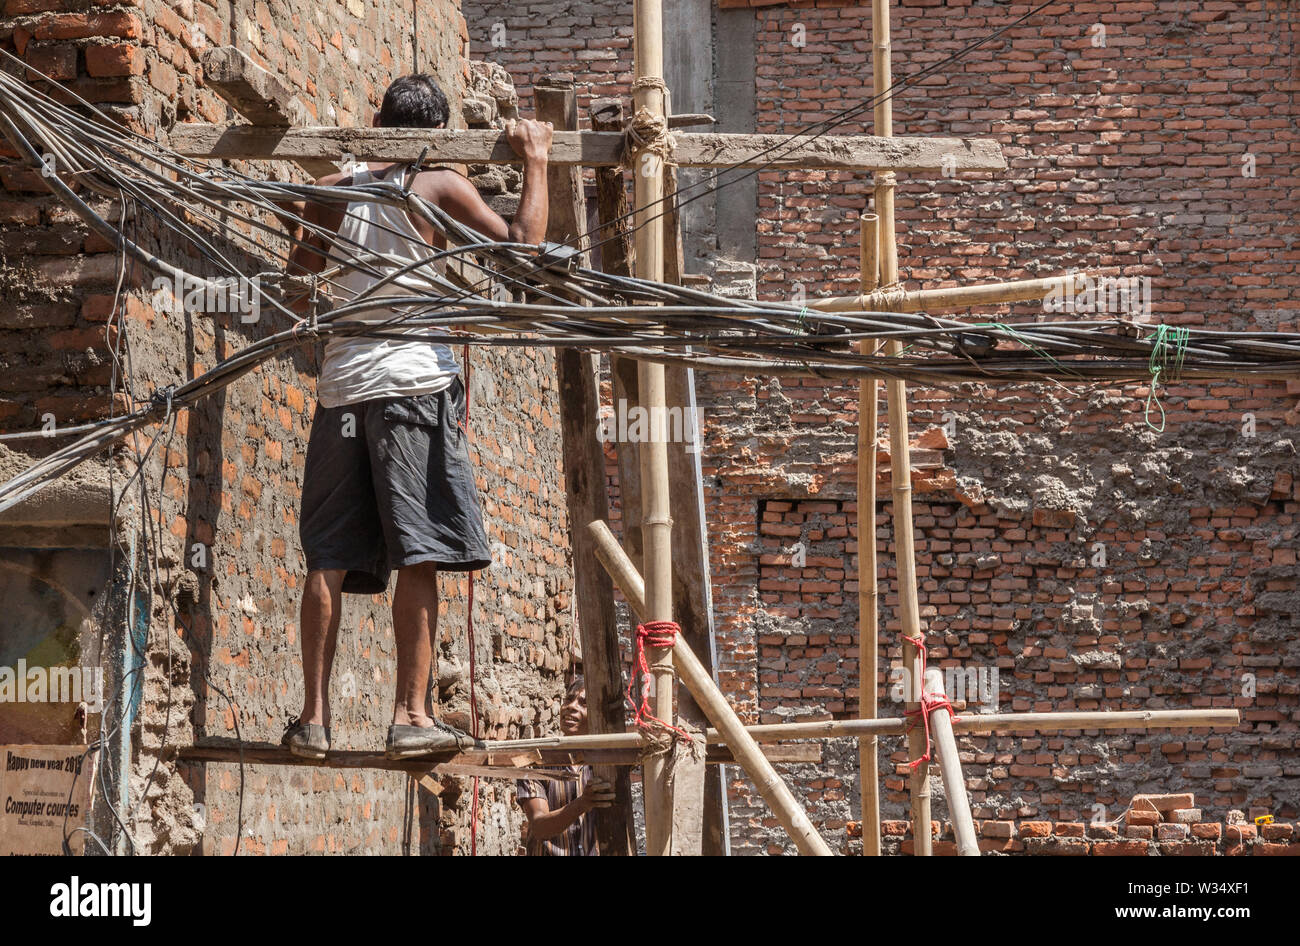 Man standing on bamboo scaffolding during reconstruction after earthquake damage in Kathmandu. Stock Photo